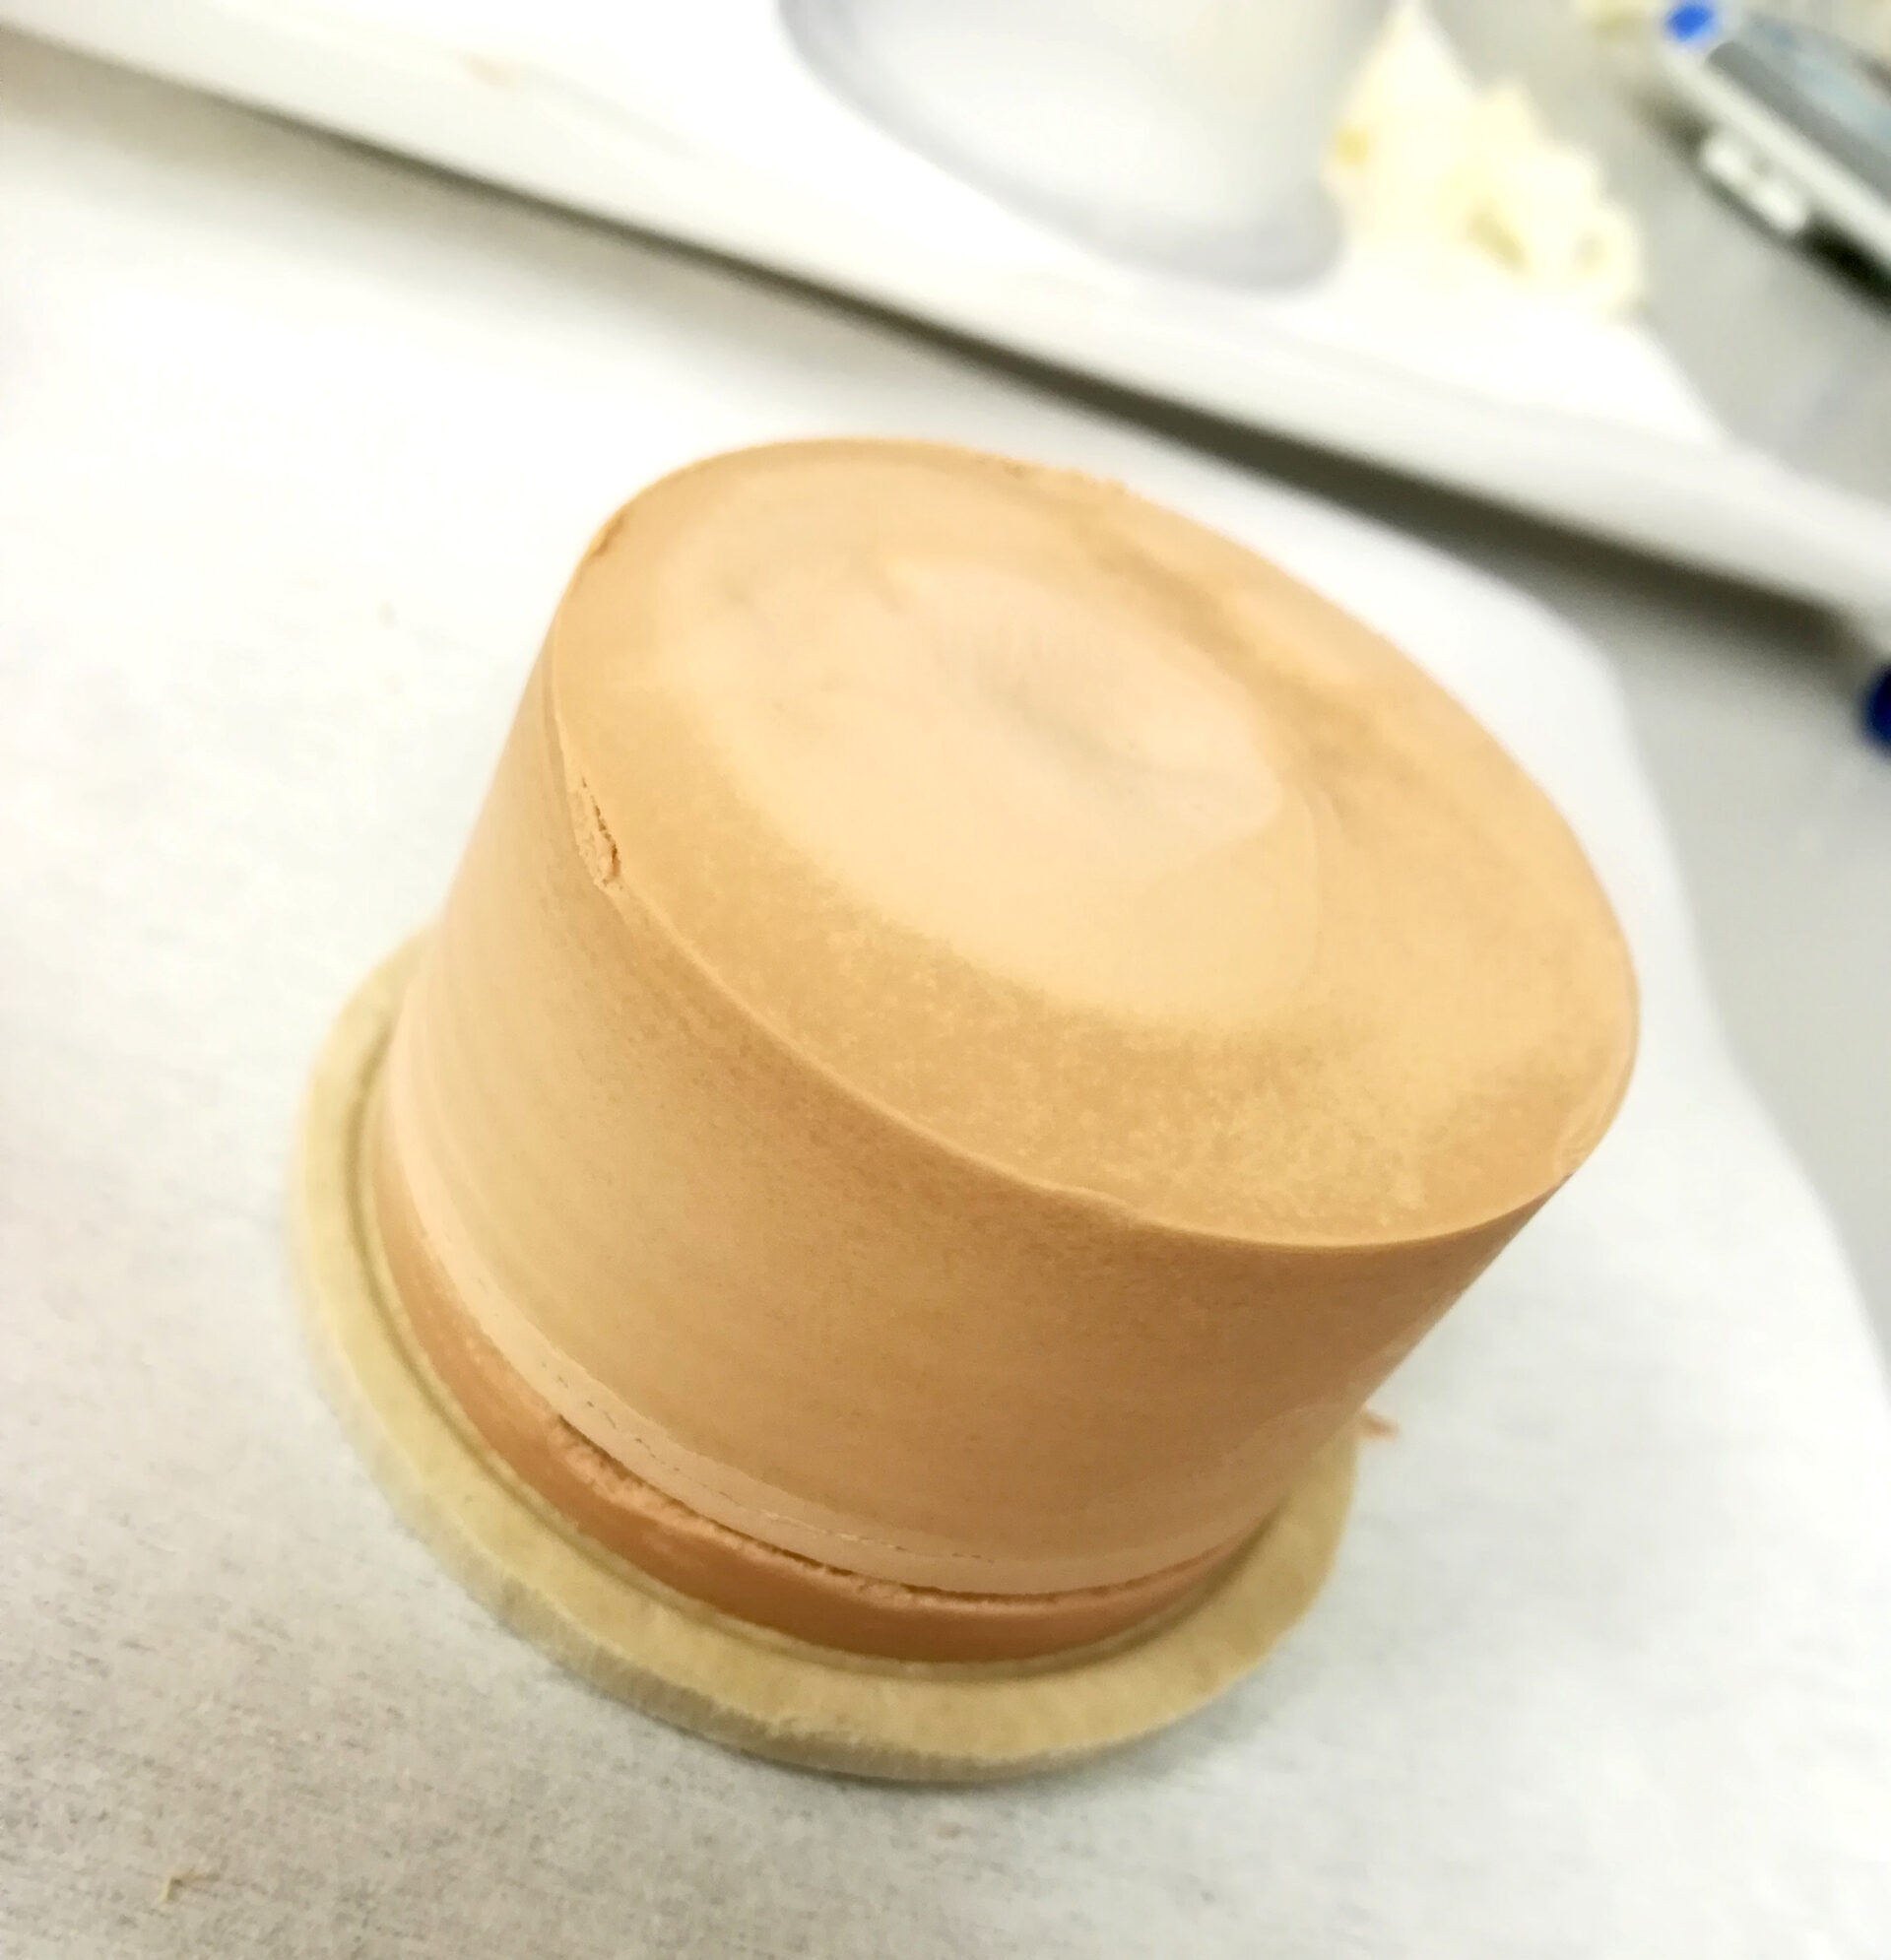 filter cake produced in a 2" capsule during filtration tests